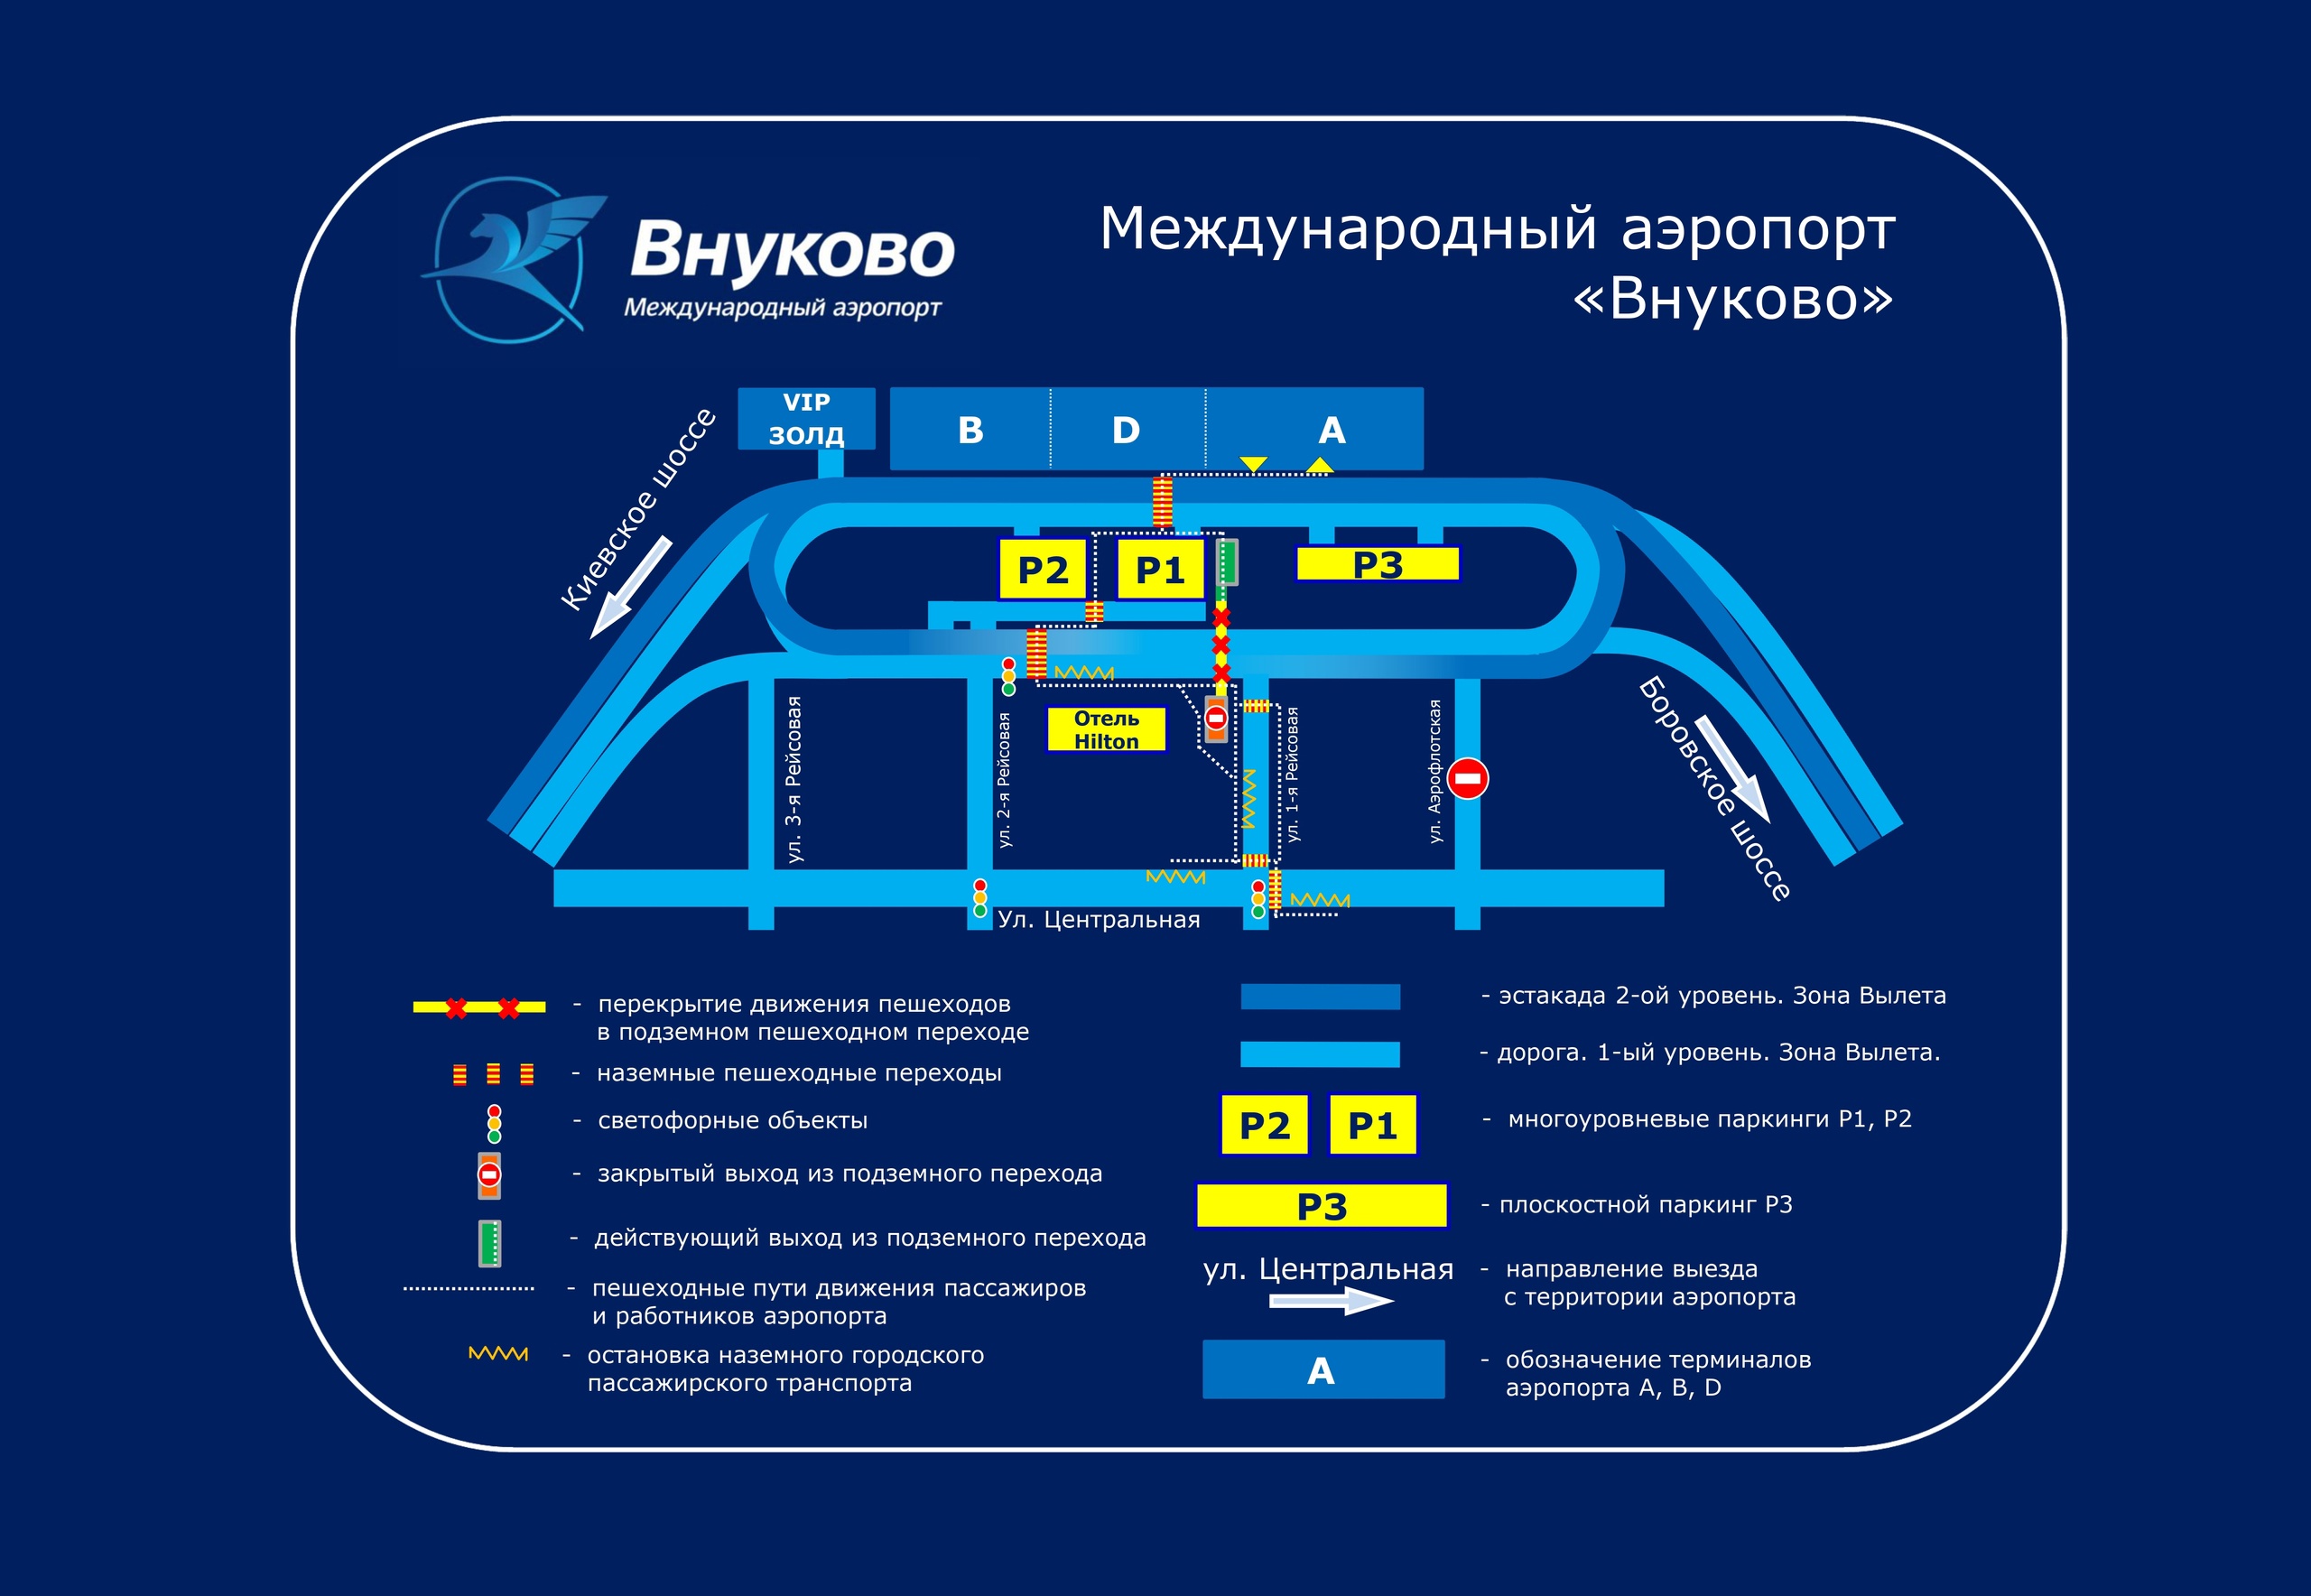 Information about traffic difficulties and closure of a part of the underground passage of Terminal A of Vnukovo Airport